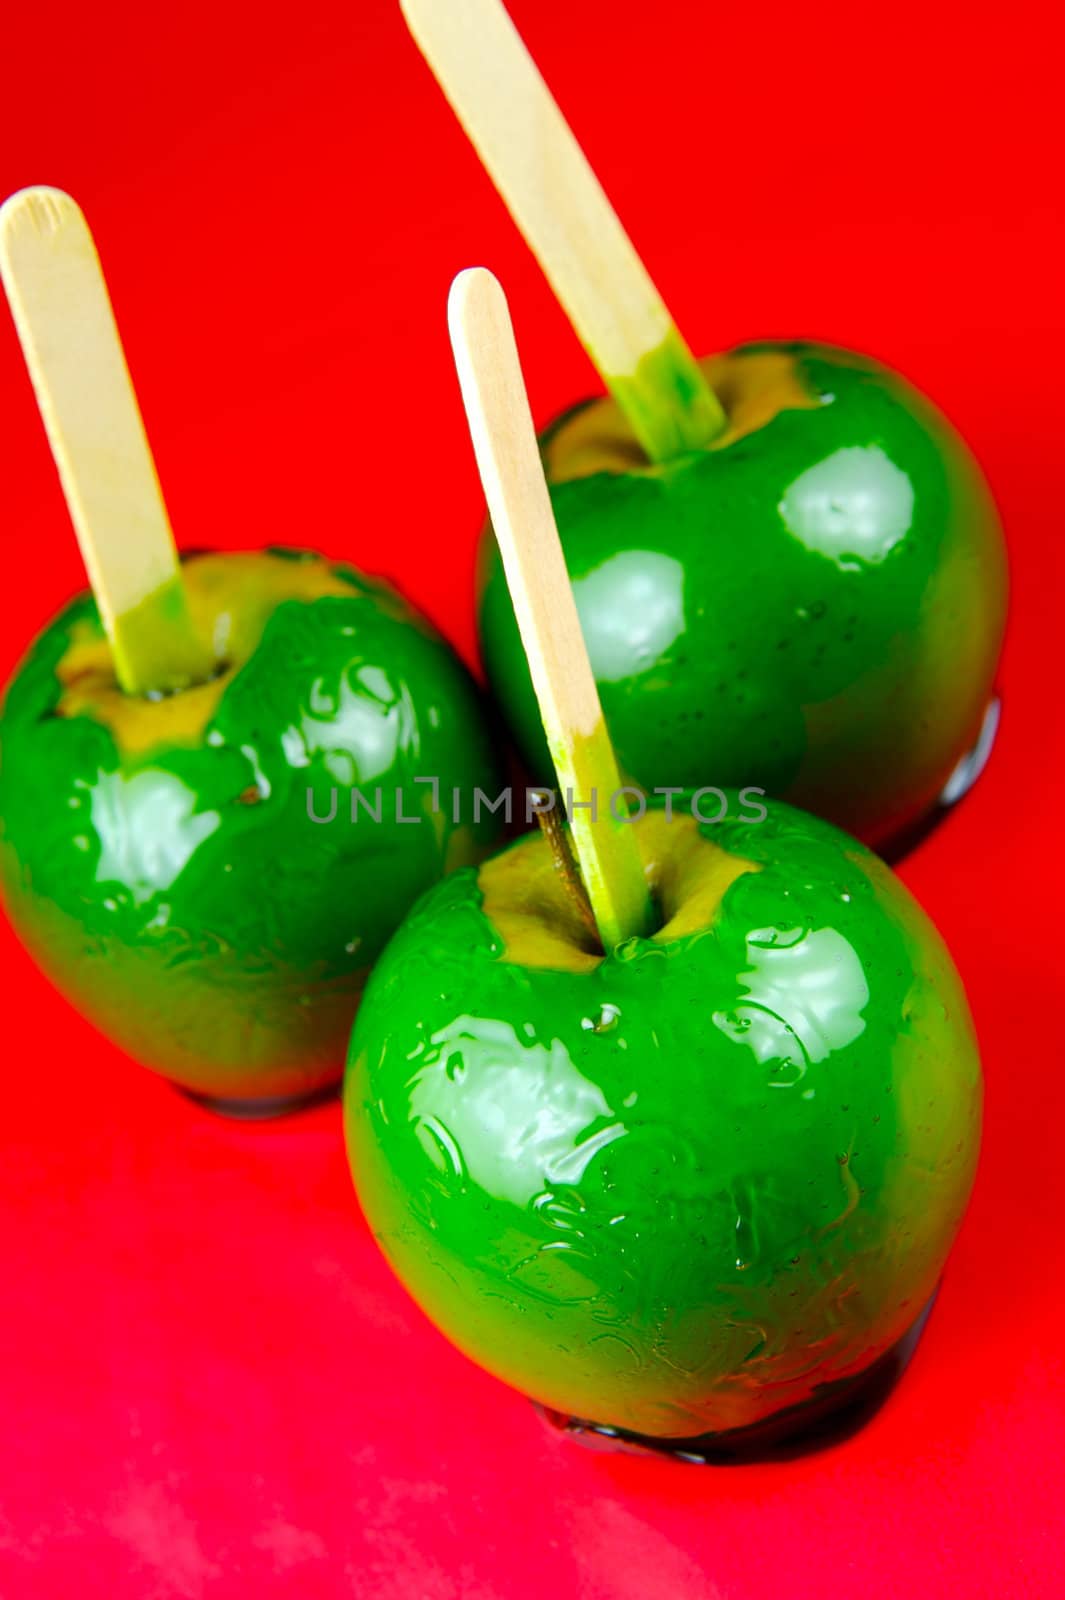 Green Toffee Apples by Kitch